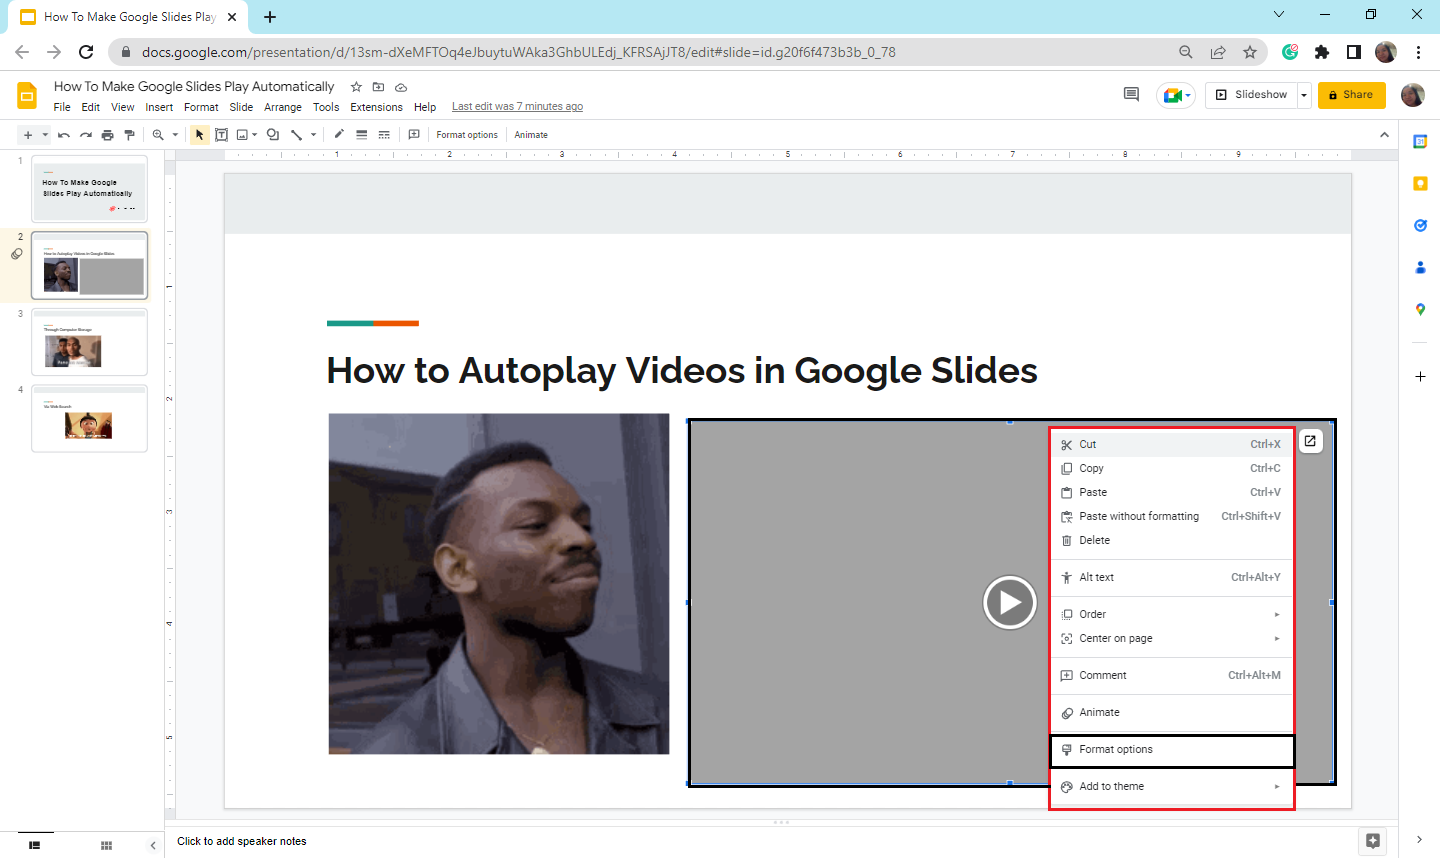 Right-click the video and select "Format Options"